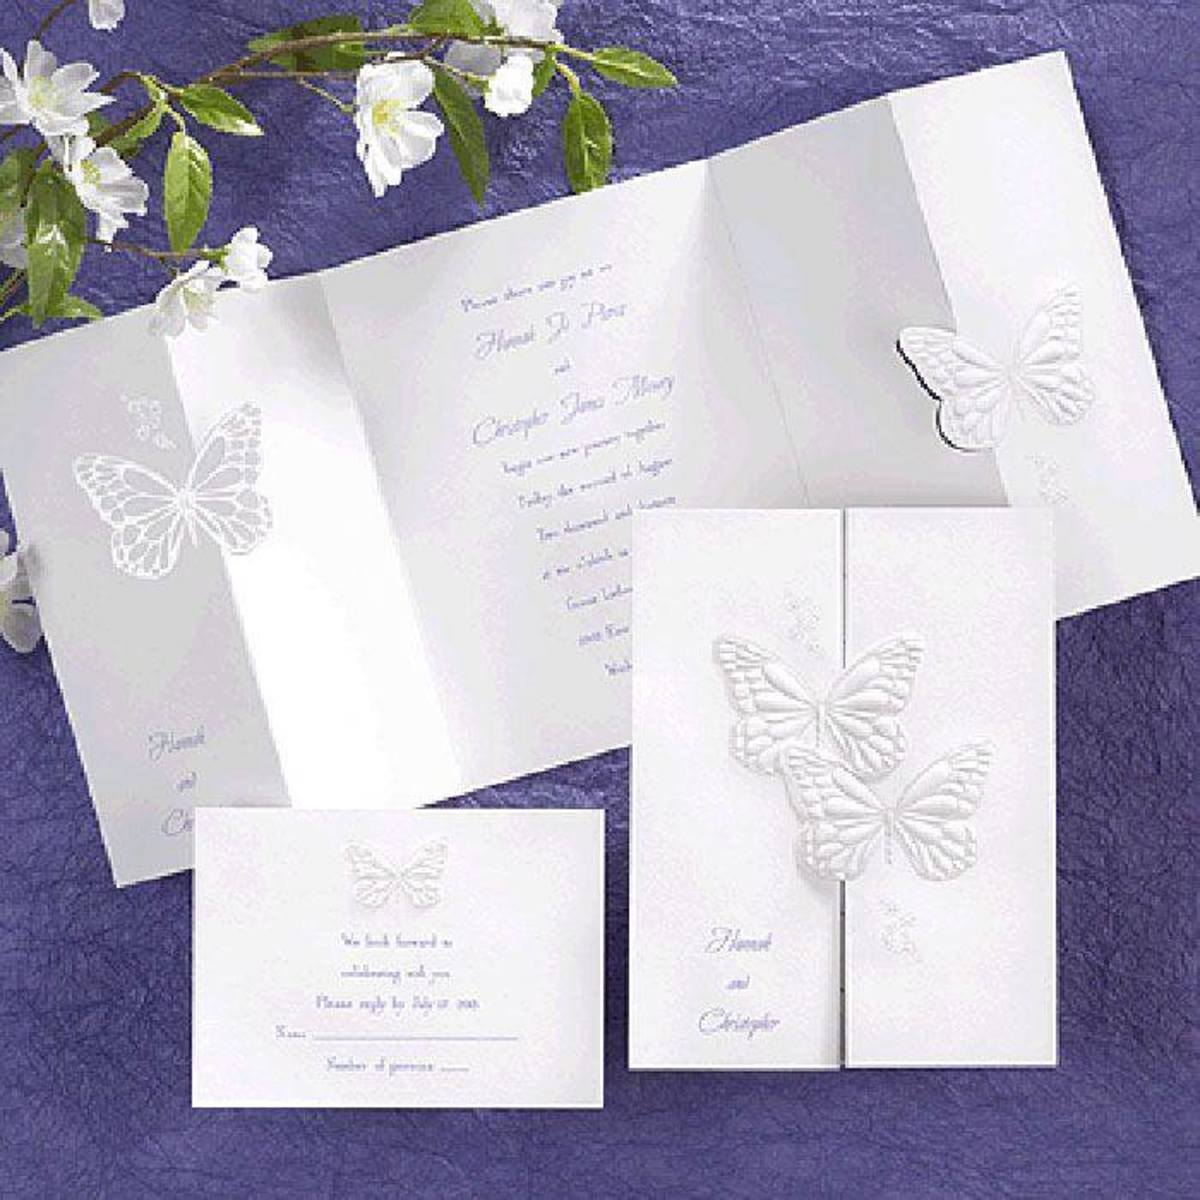 Butterfly invitation kits make an easy and economical way to create your own personalized wedding invites. The kits come with everything you need. You just format the information and print them on your home printer